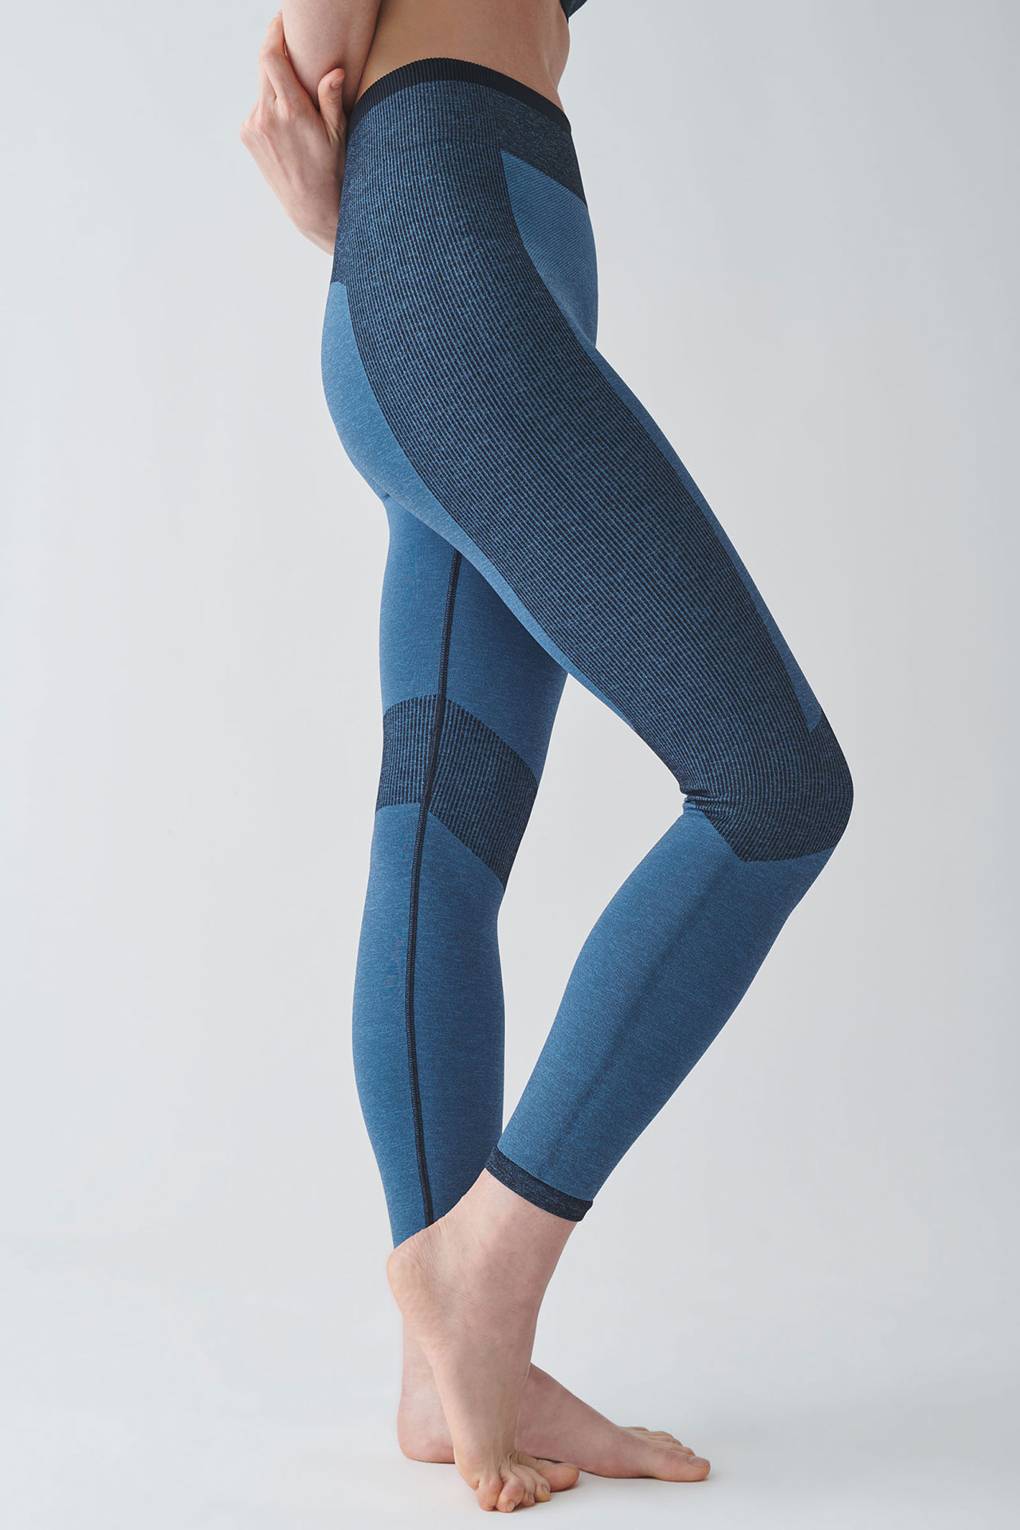 12 Best Squat-Proof Leggings for Your Daily Workout